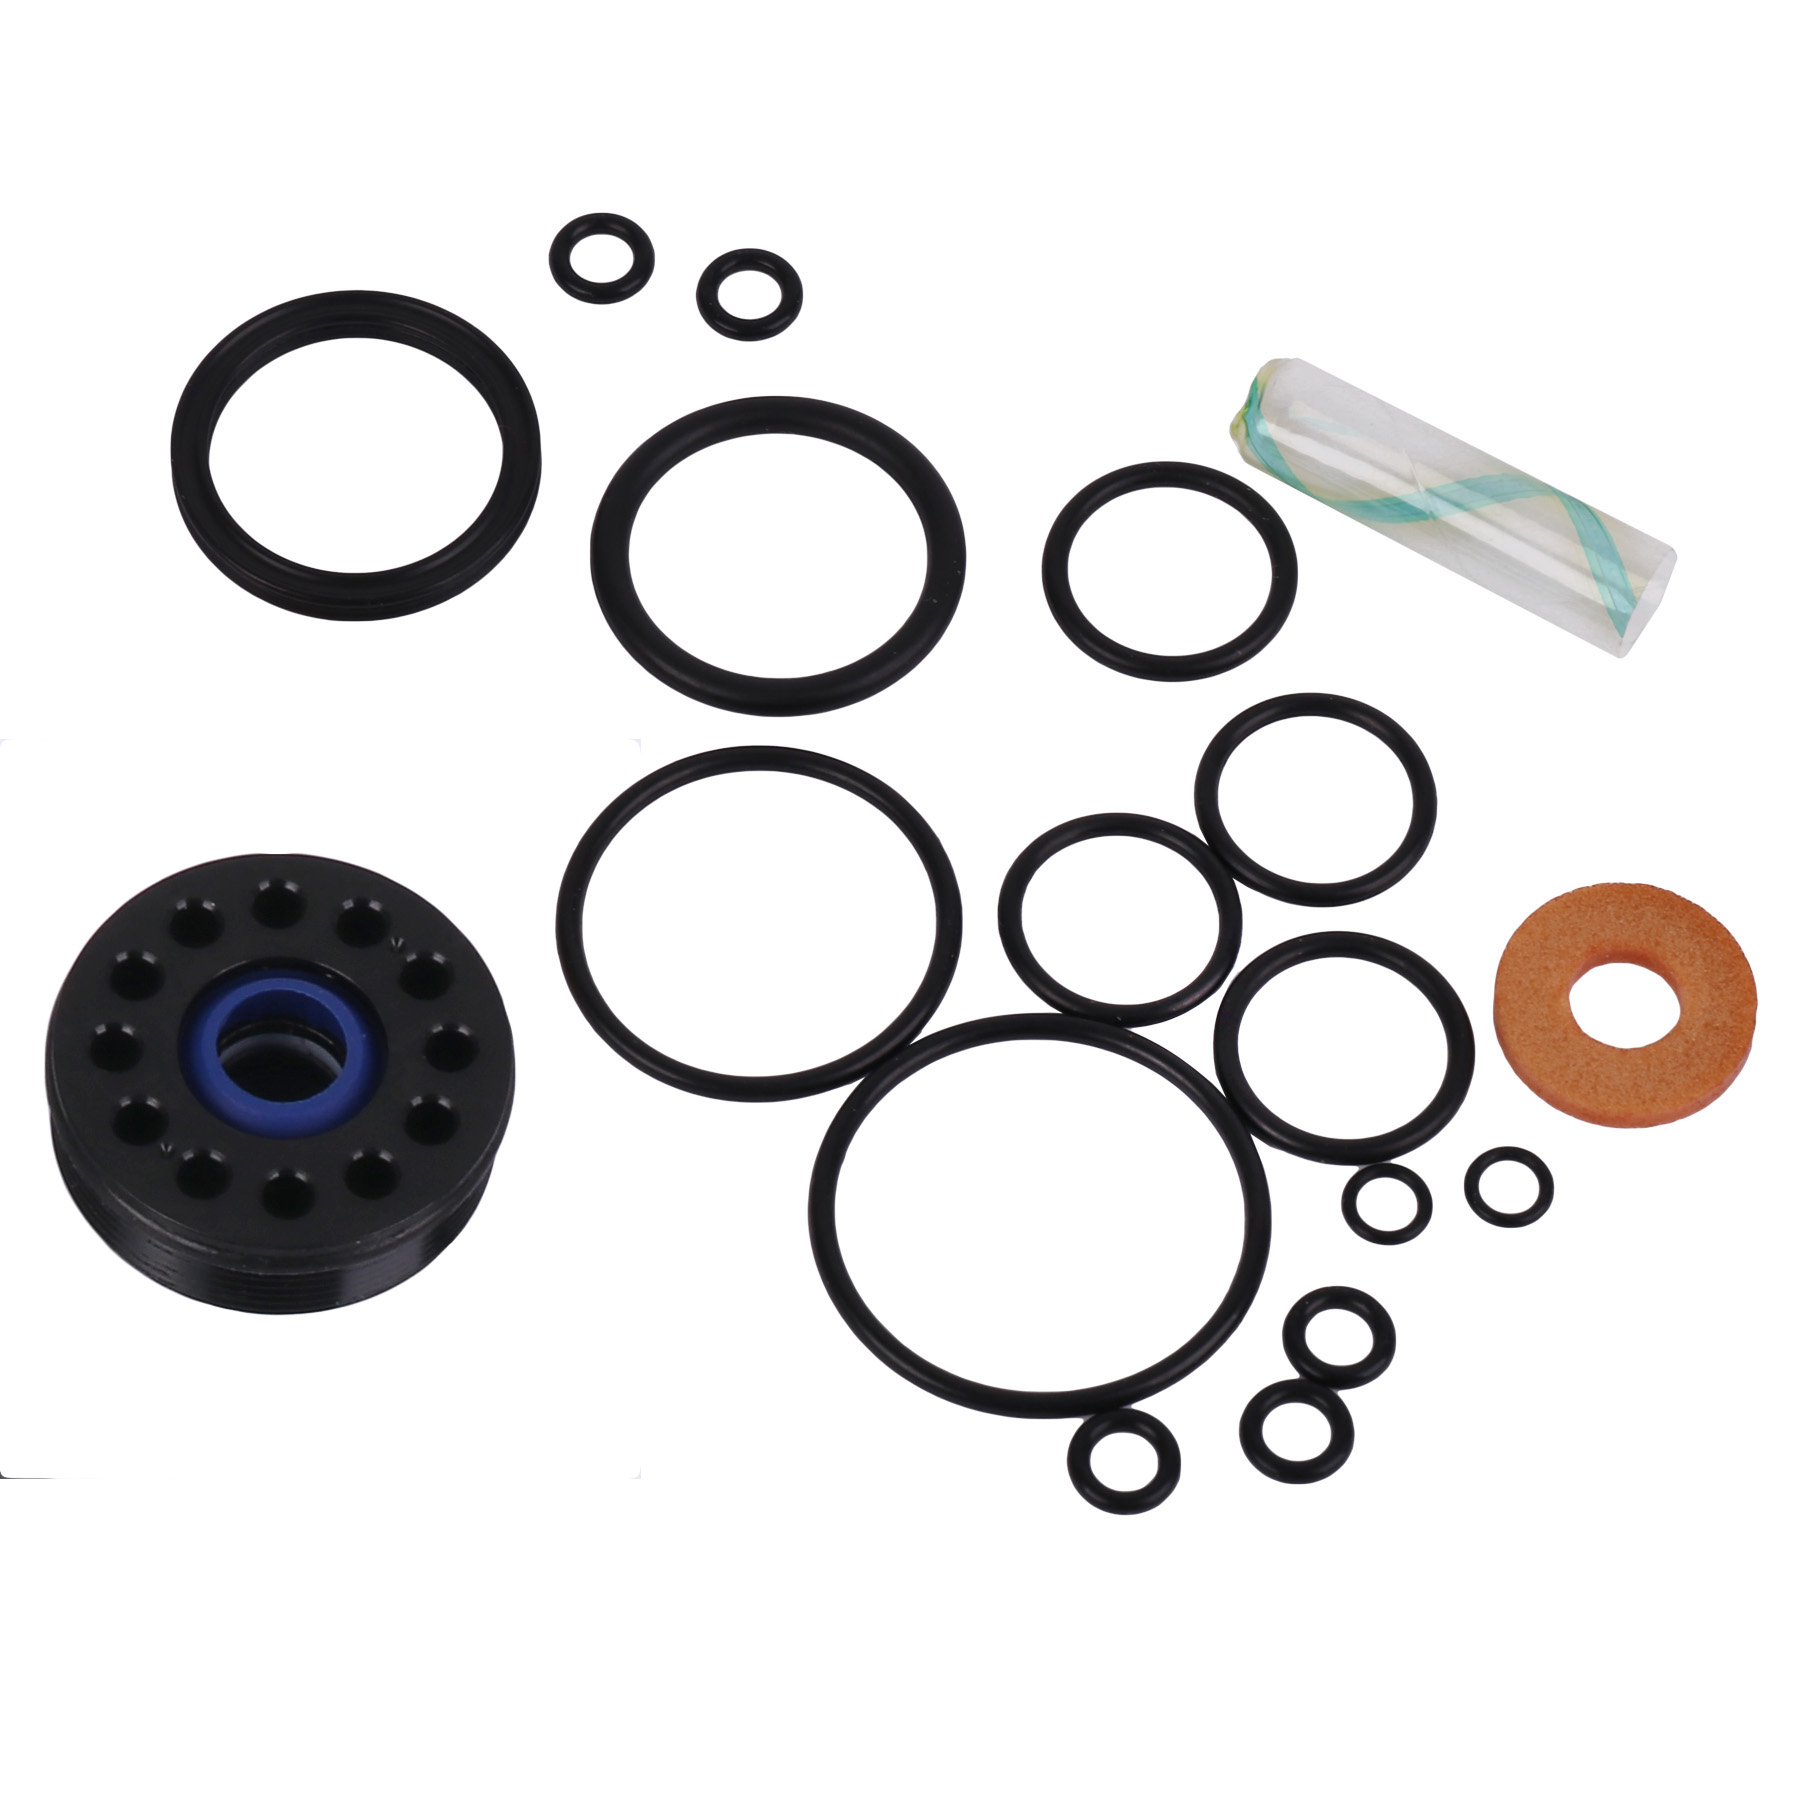 Picture of Cane Creek Service Kit for DB Coil with 9.5 mm Shaft Diameter